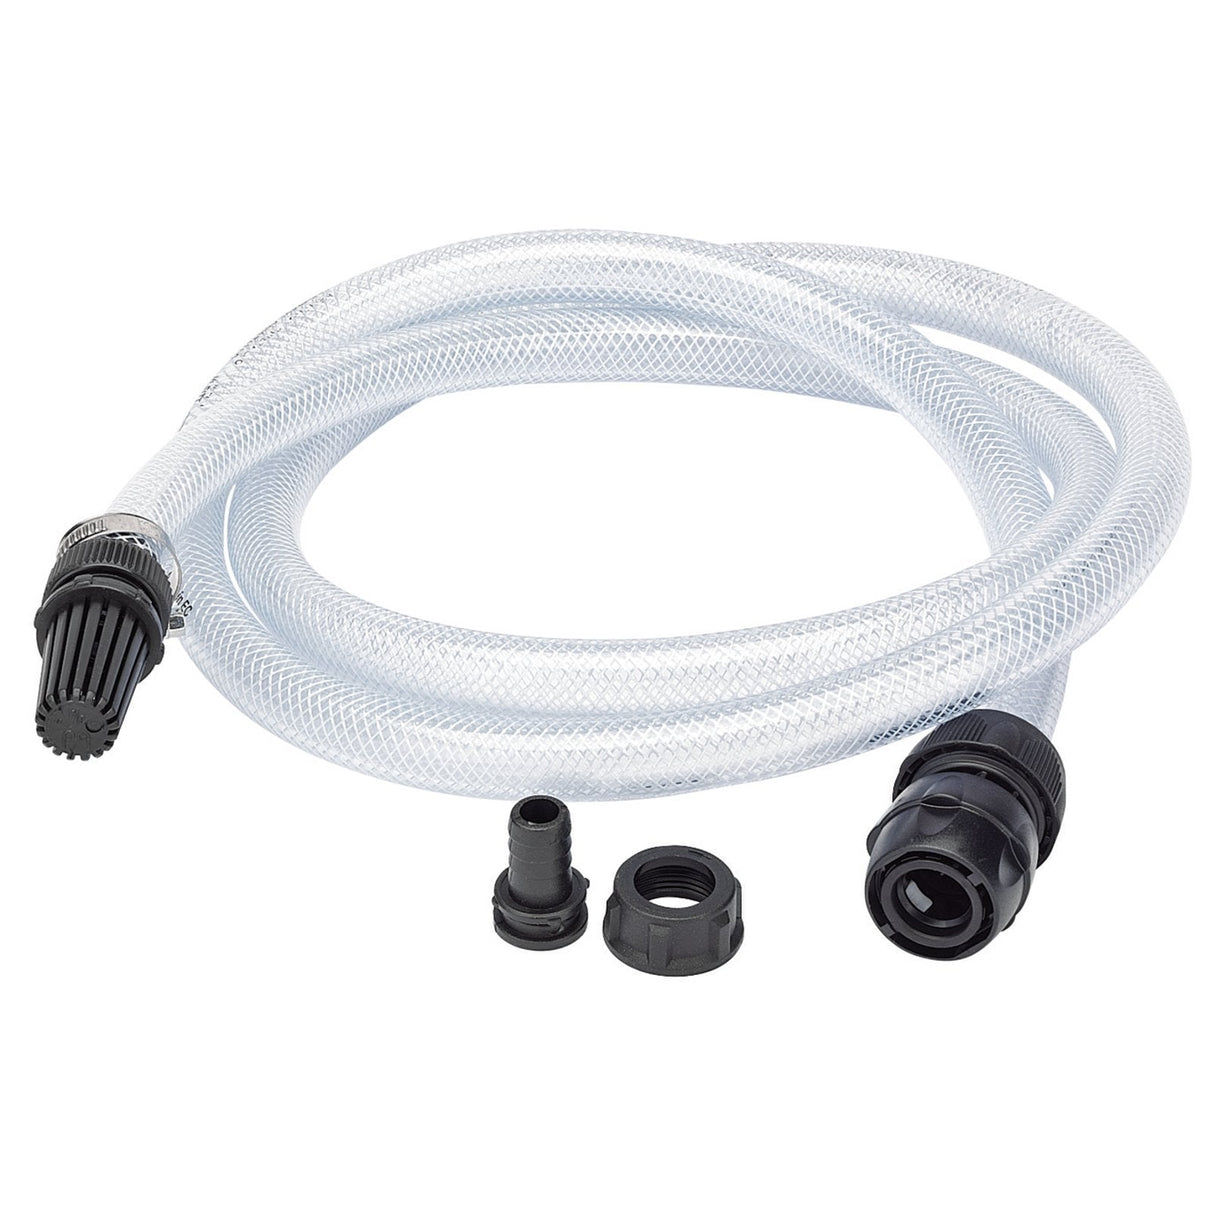 Draper Suction Hose Kit For Petrol Pressure Washer For Ppw540, Ppw690 And Ppw900 - APPW06 - Farming Parts